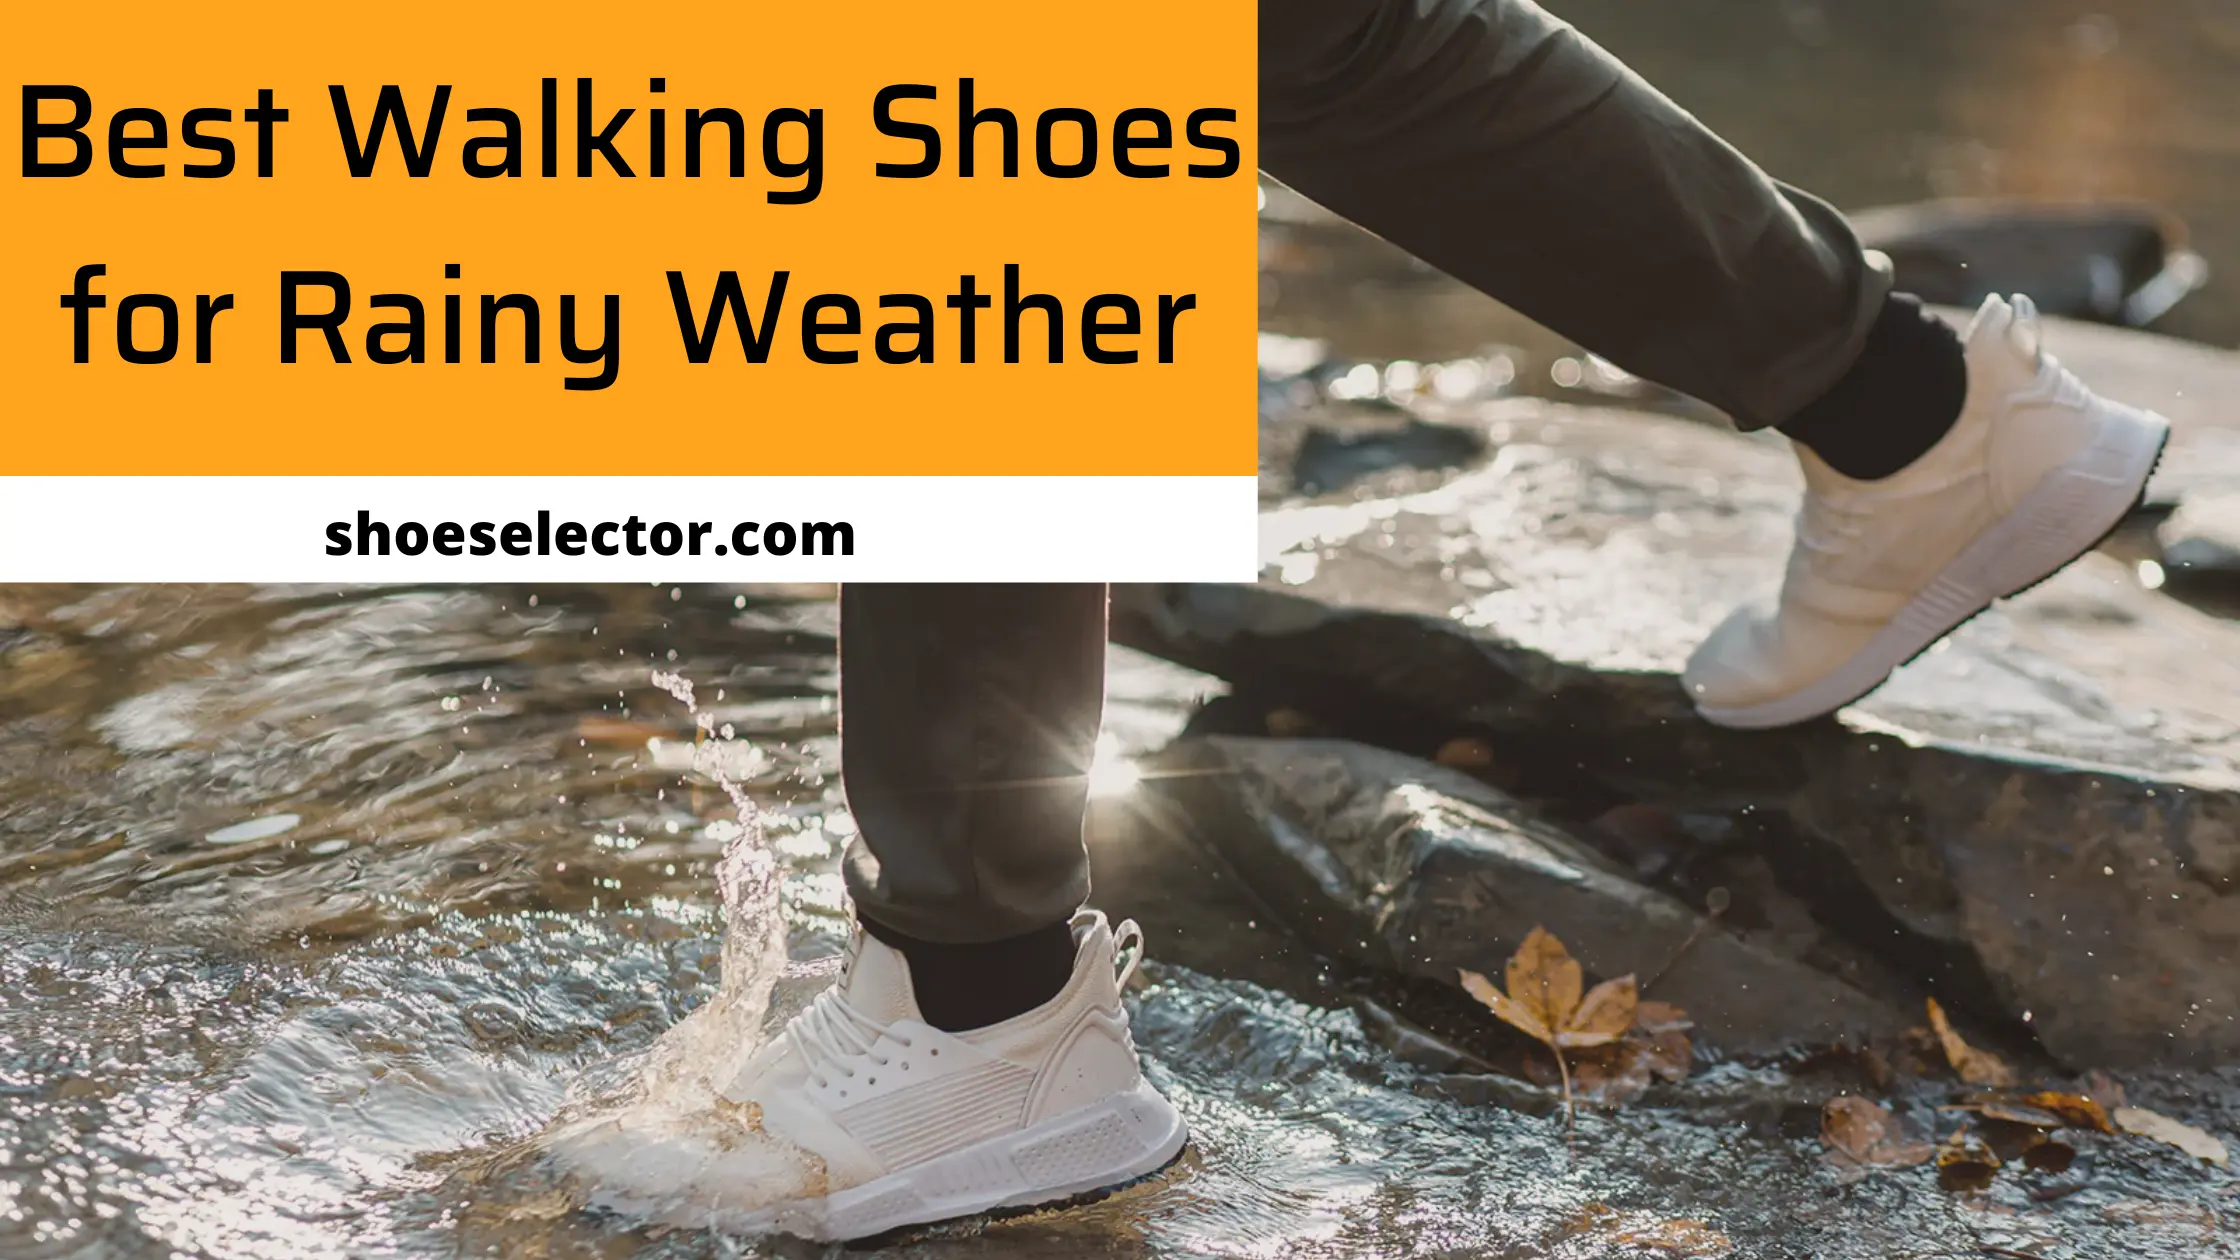 Best Walking Shoes For Rainy Weather - Supportive And Stylish